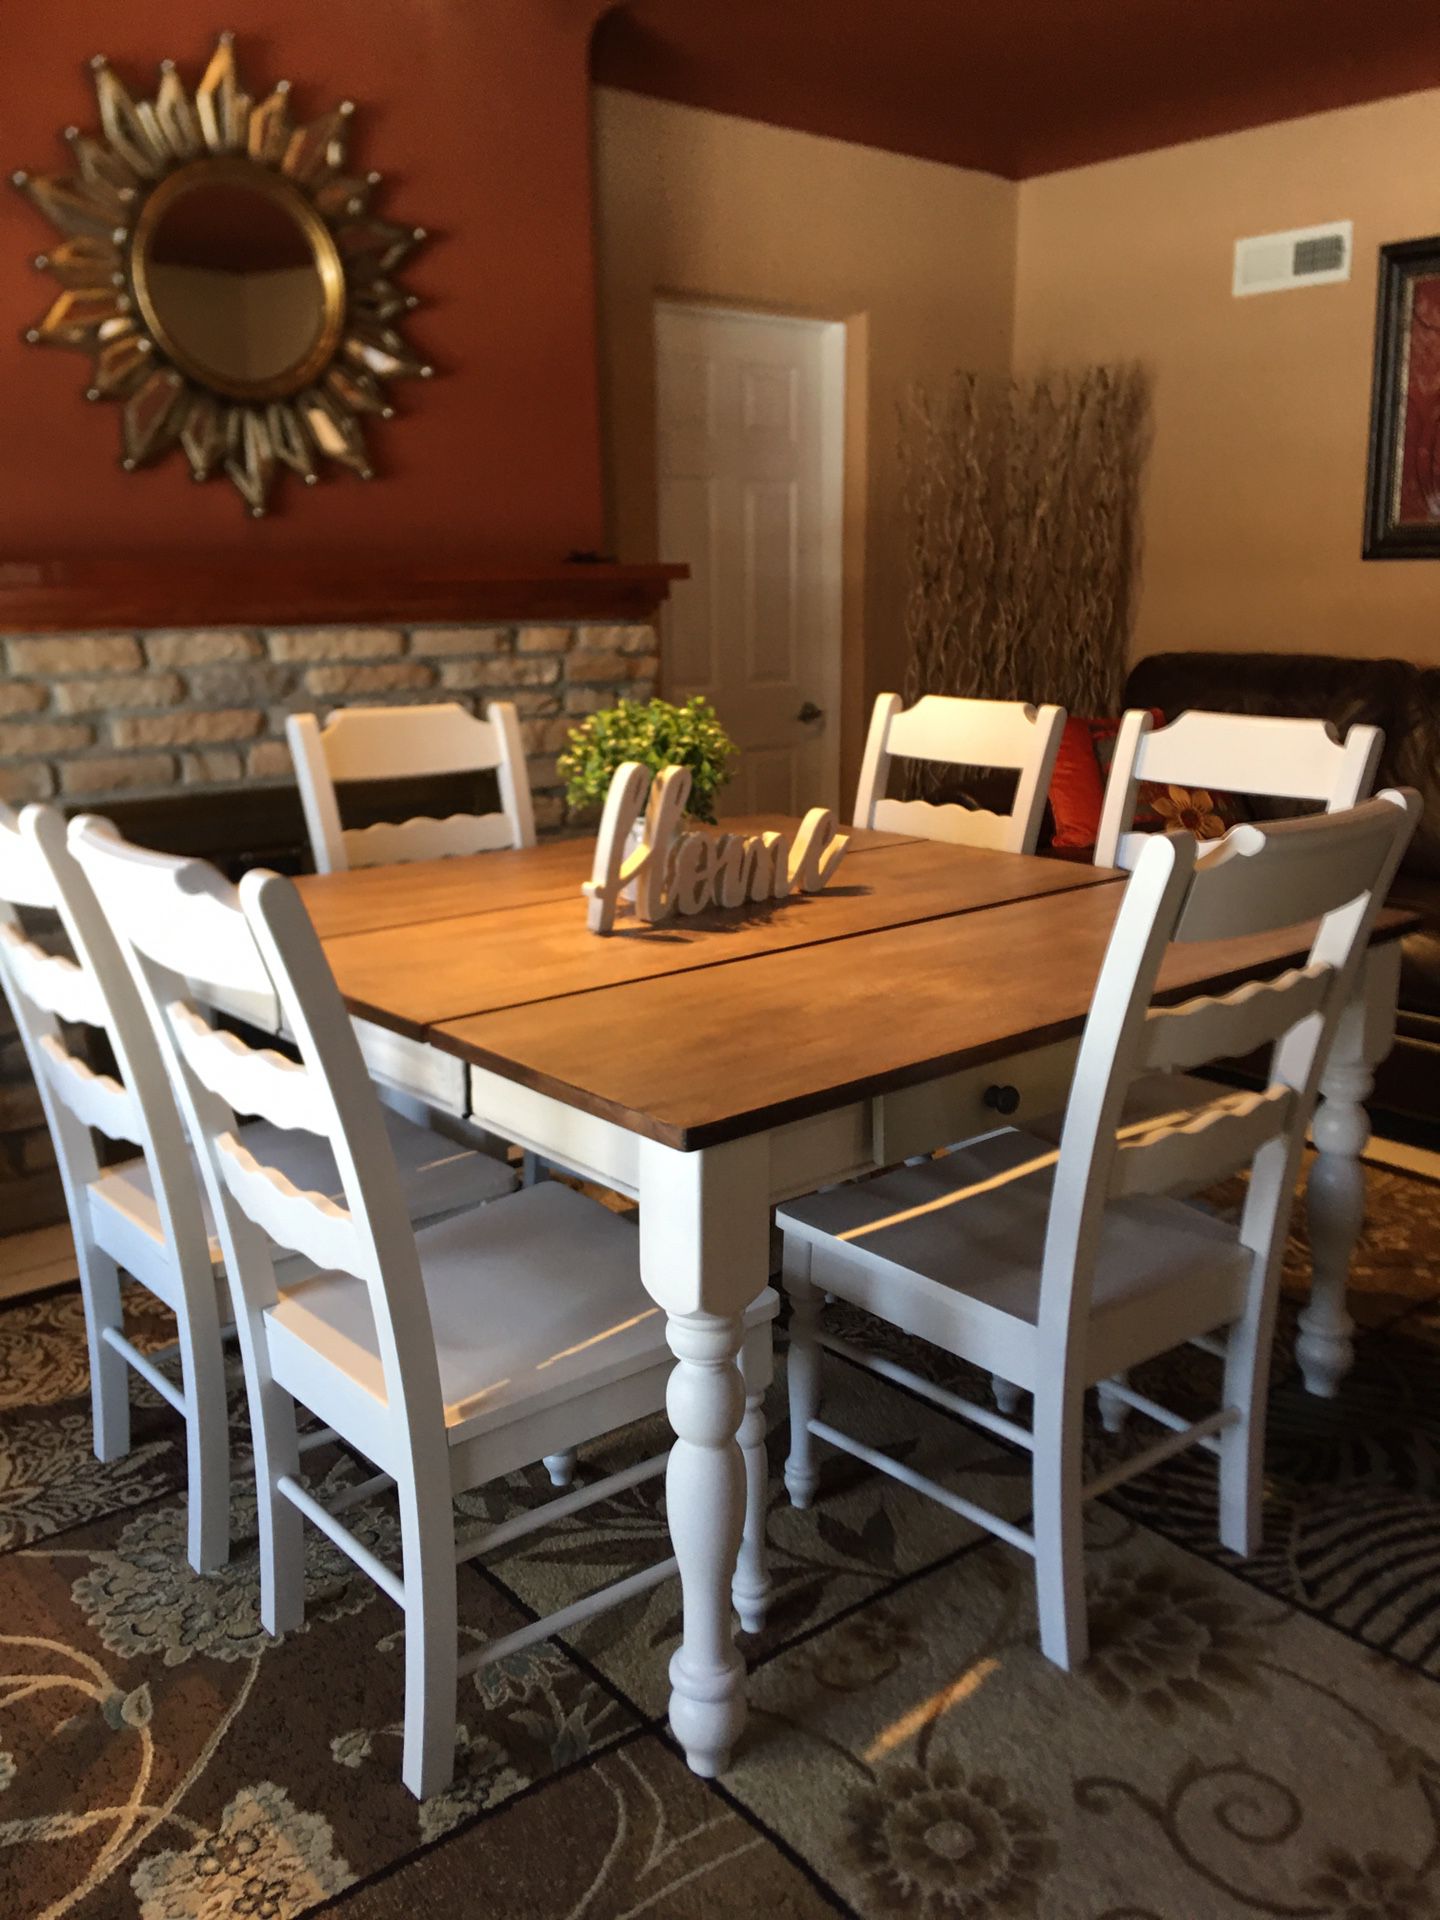 Cute kitchen or dining table / 6 sturdy chairs❤️